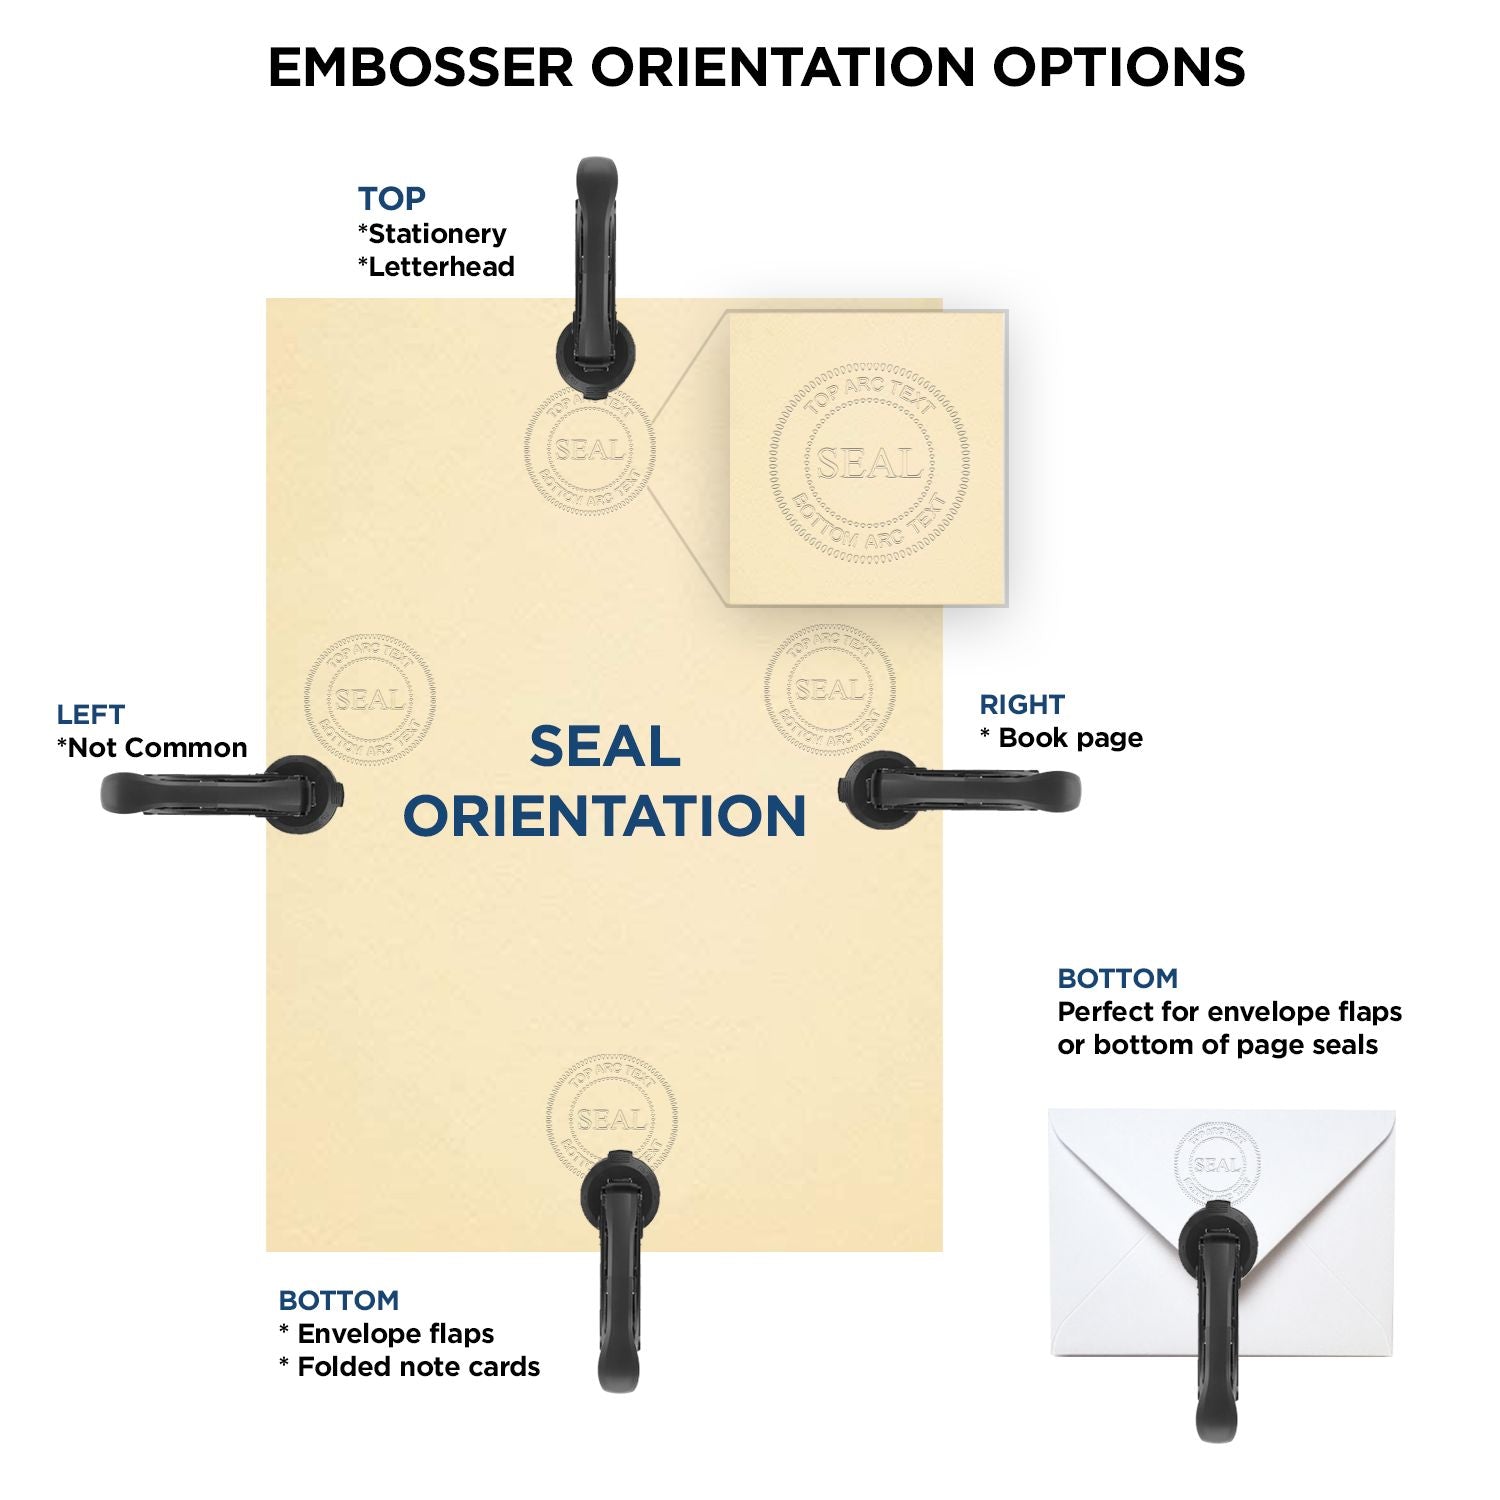 An infographic for the Handheld Oklahoma Land Surveyor Seal showing embosser orientation, this is showing examples of a top, bottom, right and left insert.